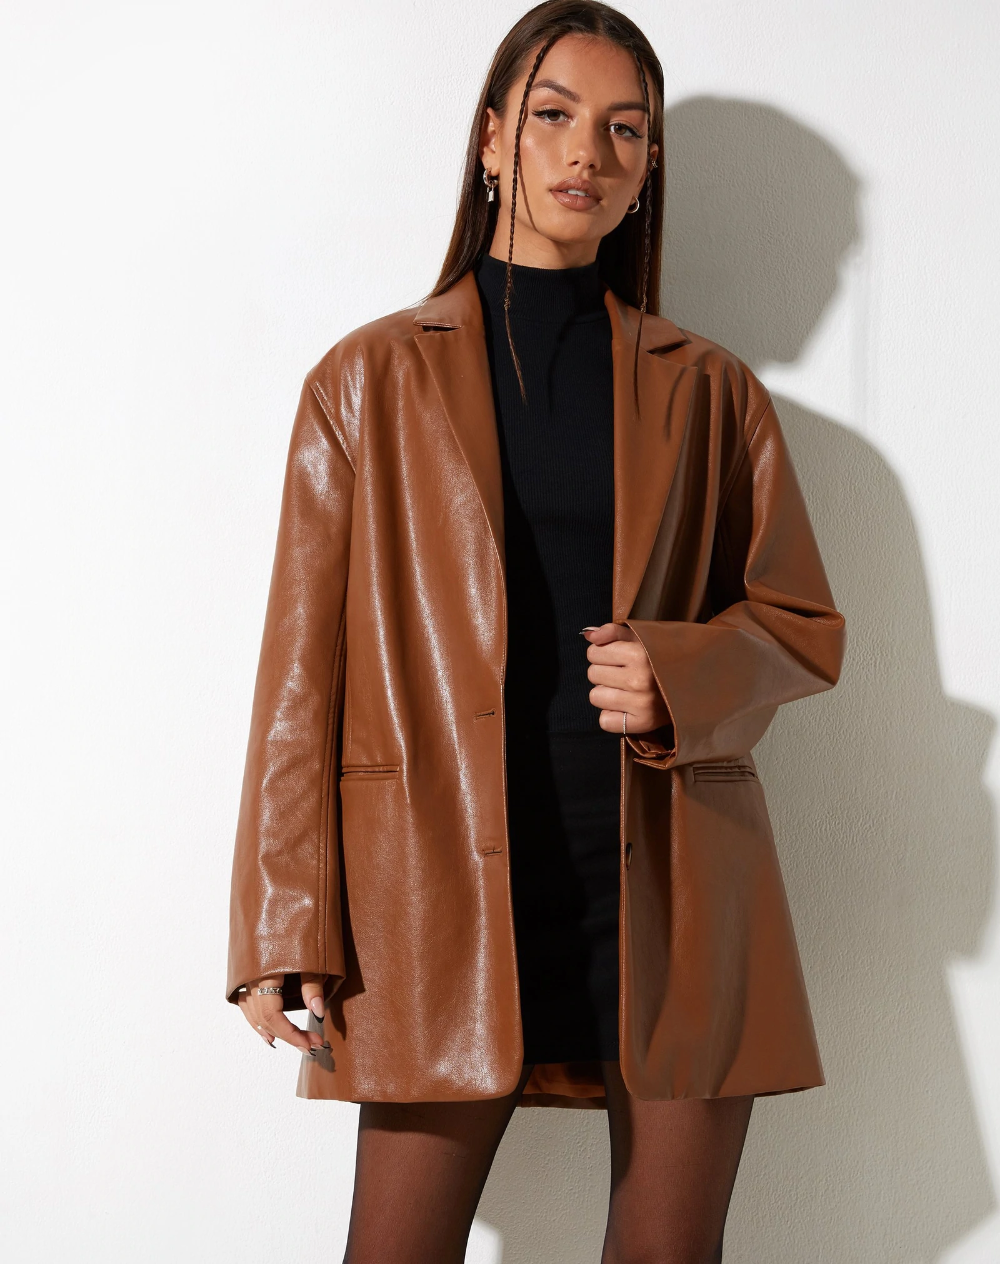 Classic Elegance: Brown Blazers for Every Occasion